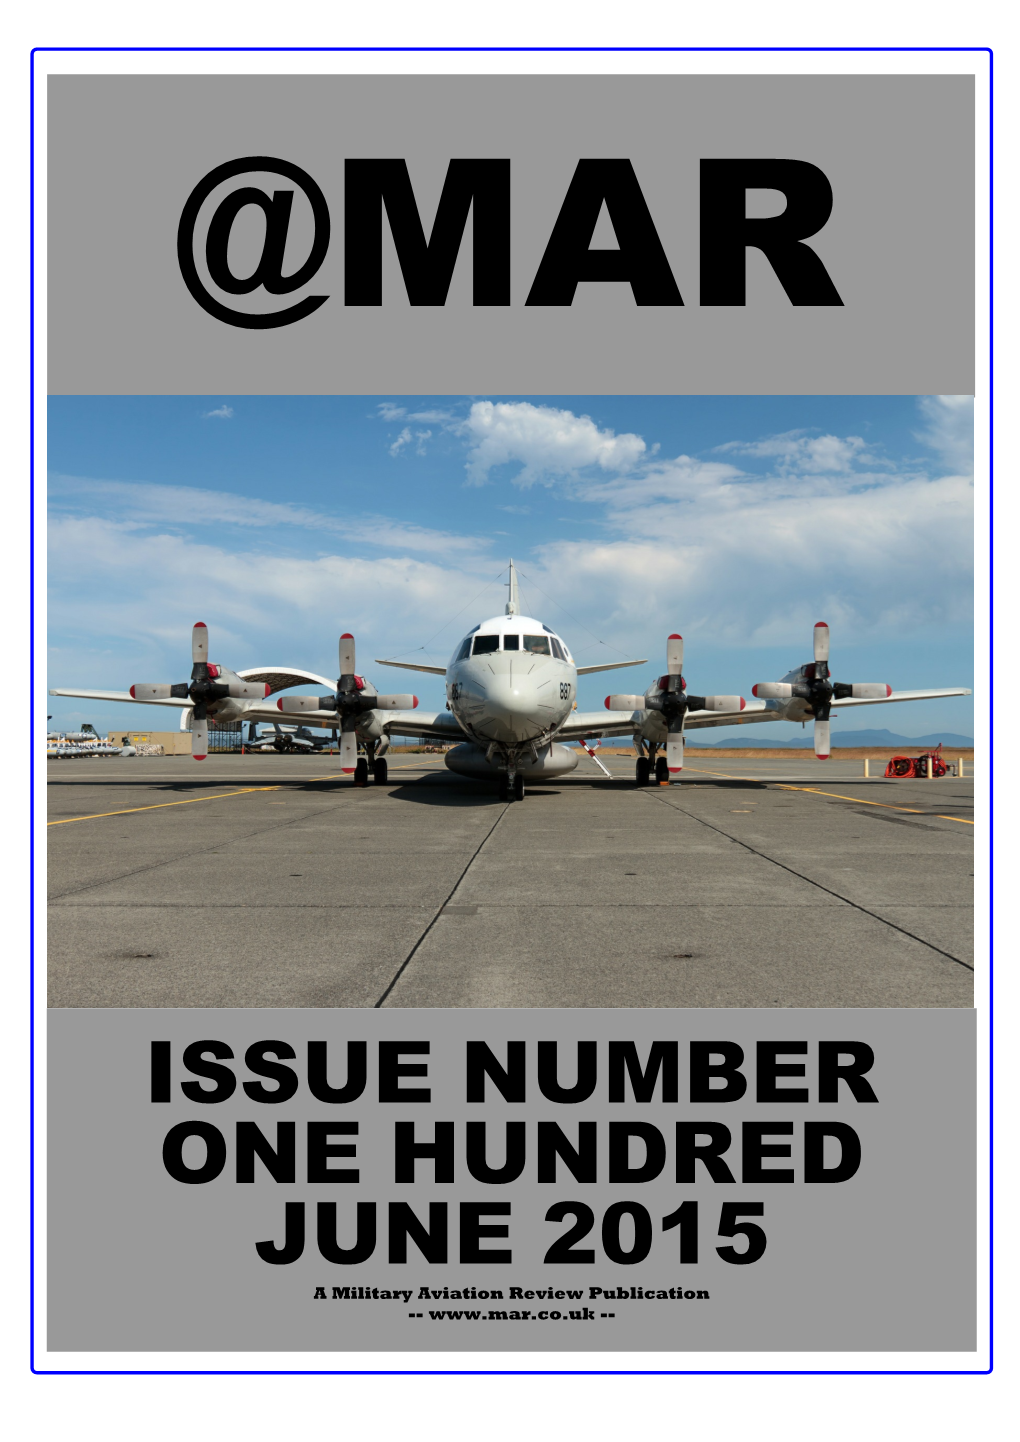 Issue Number One Hundred June 2015